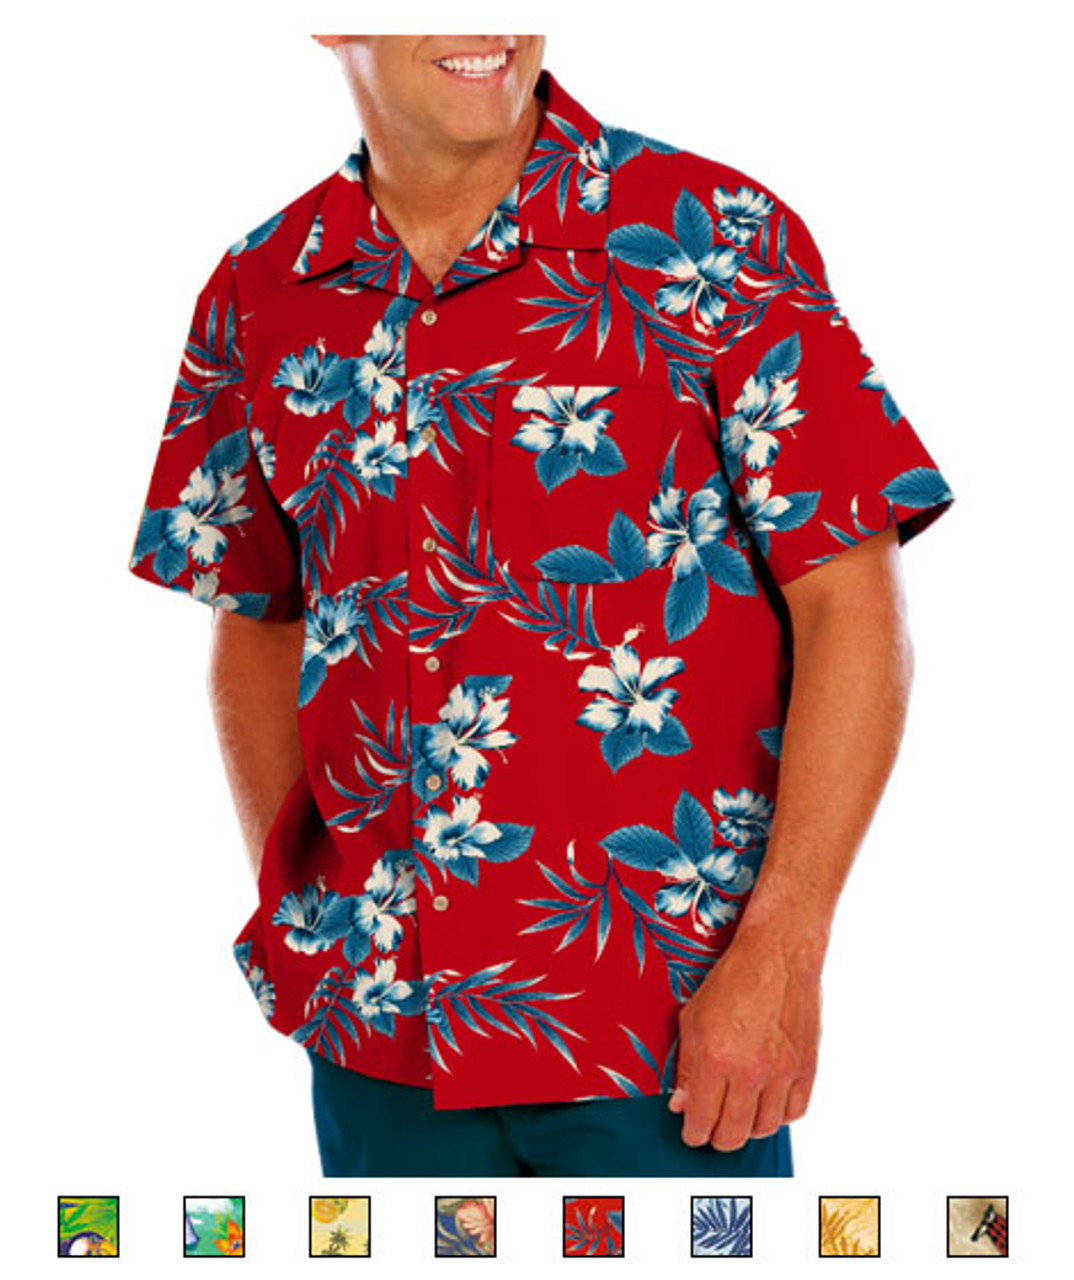 Camp shirts available in many tropic patterns